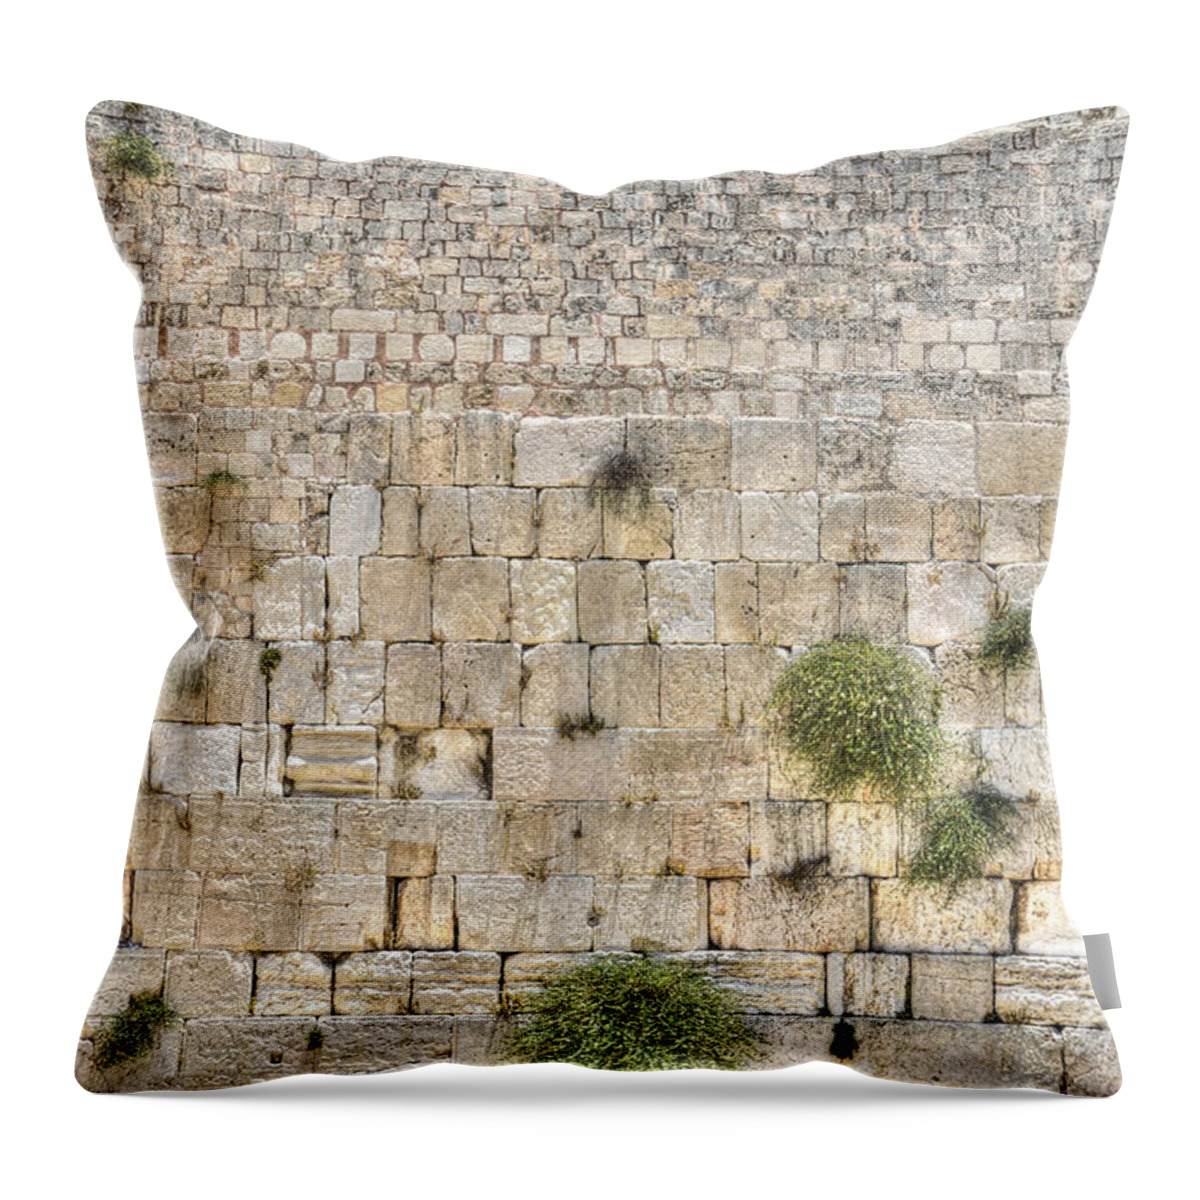 Western Wall Throw Pillow featuring the photograph The Western Wall Jerusalem Israel by Amir Paz